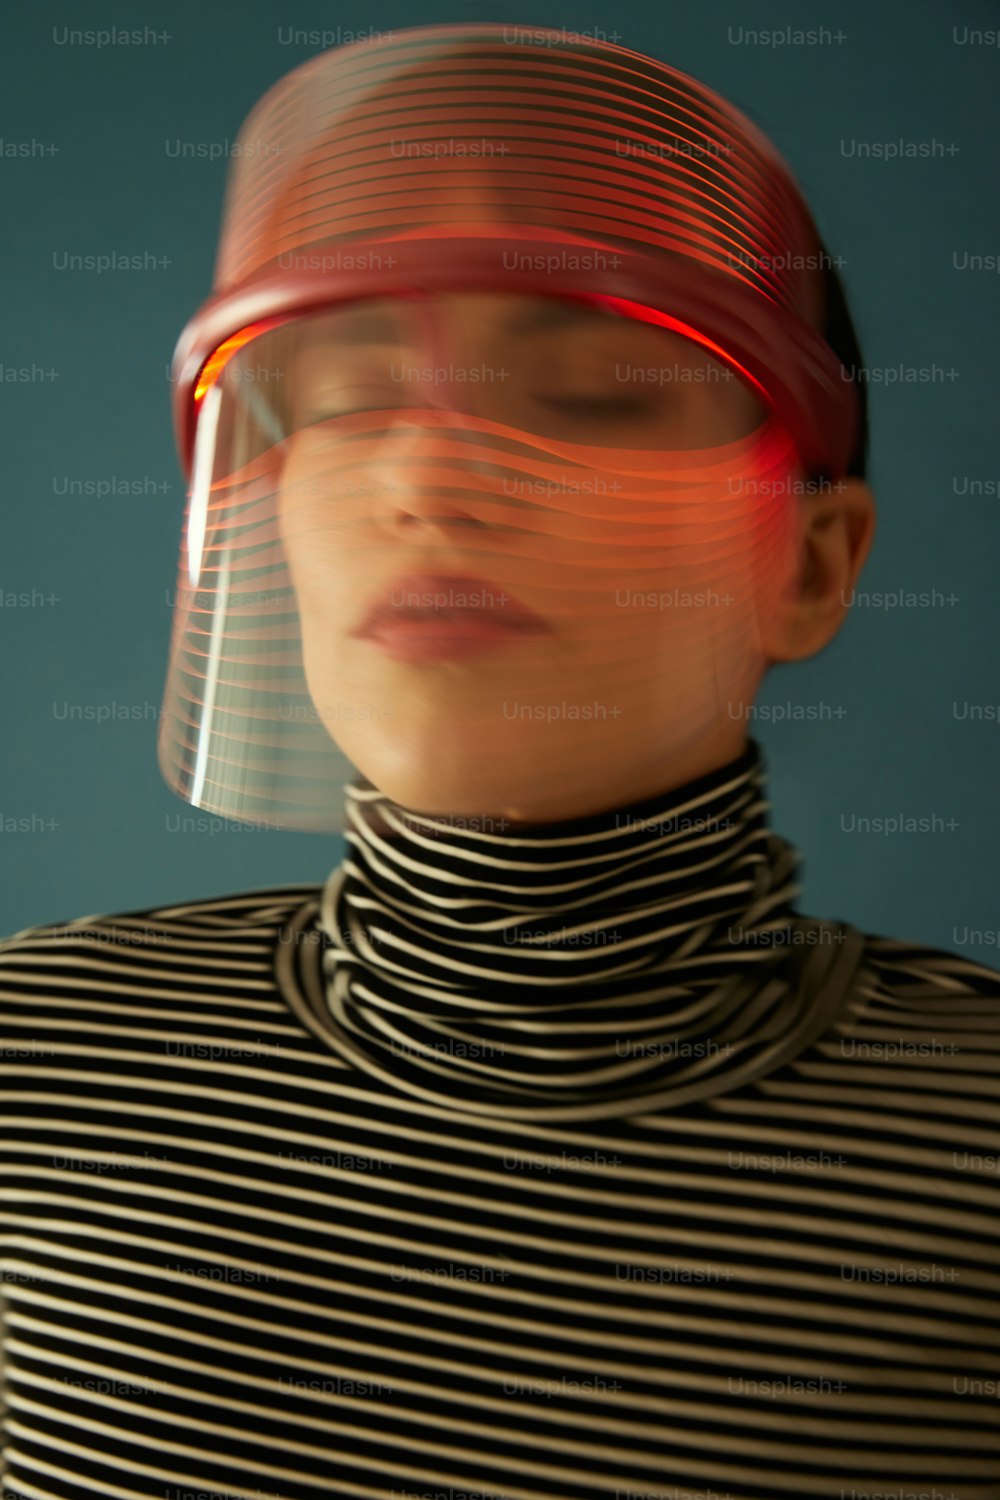 a woman wearing a plastic hat and a striped shirt